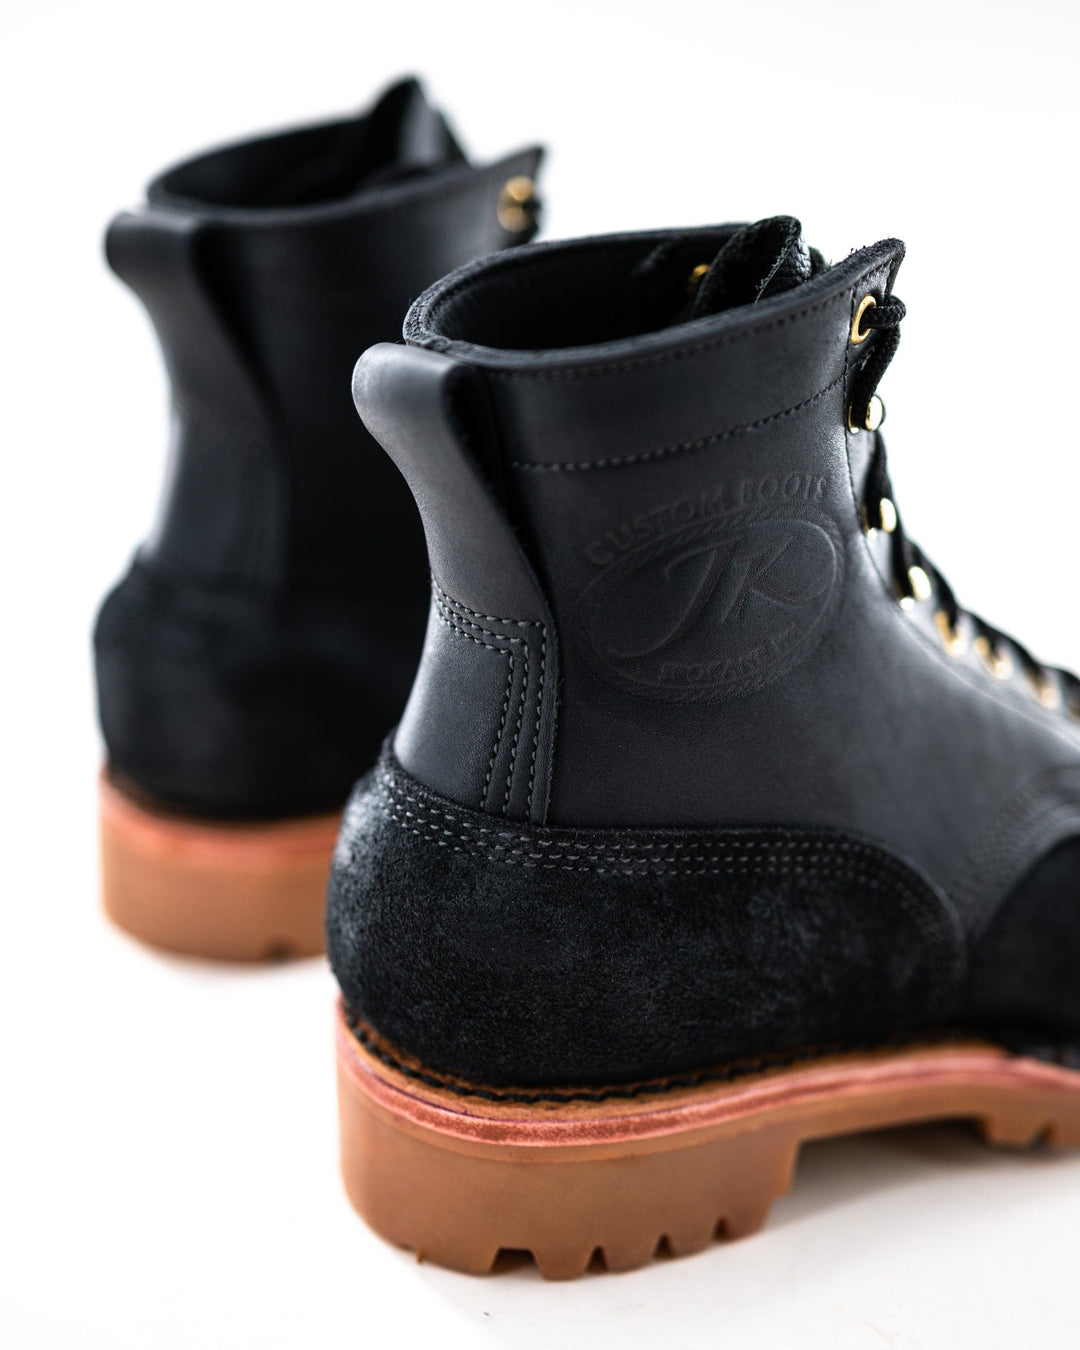 The New High-Fashion Sneaker Is…the Six-Inch Work Boot?